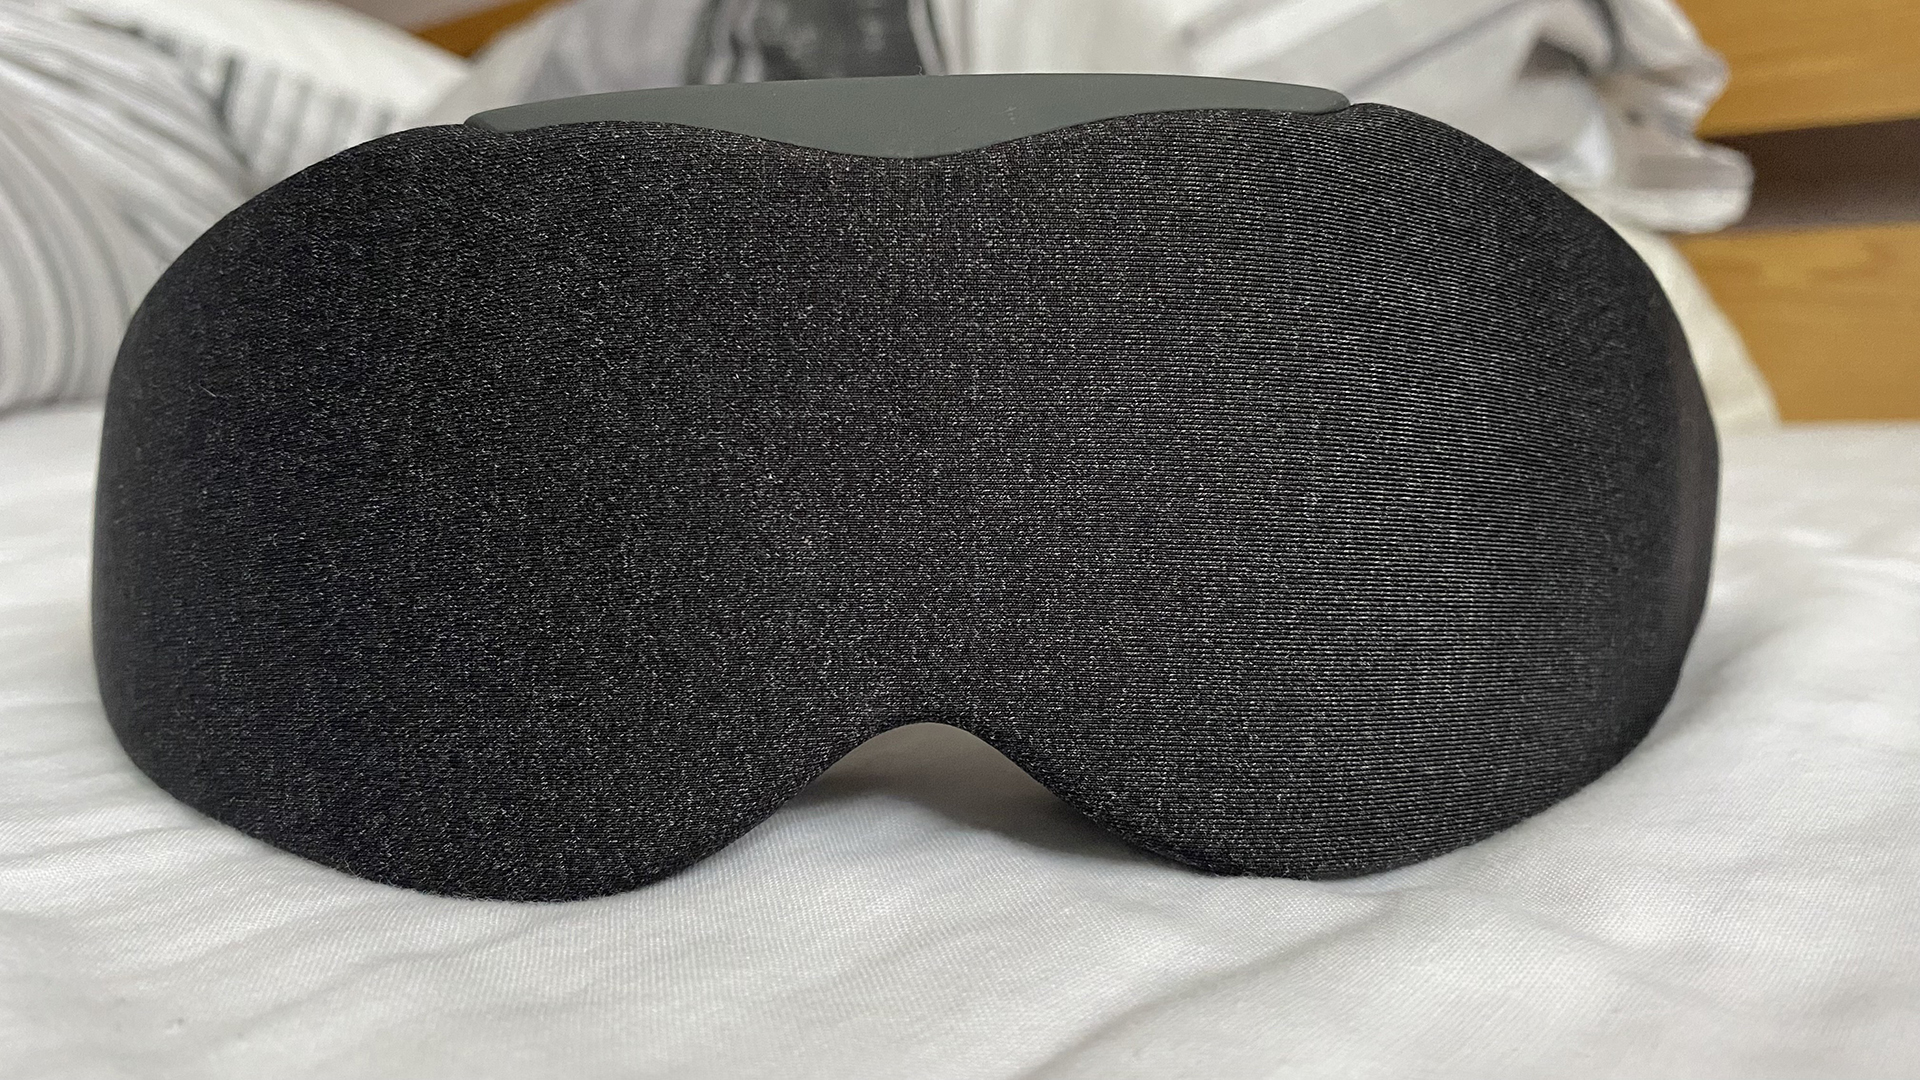 A front view of the Aura smart sleep mask